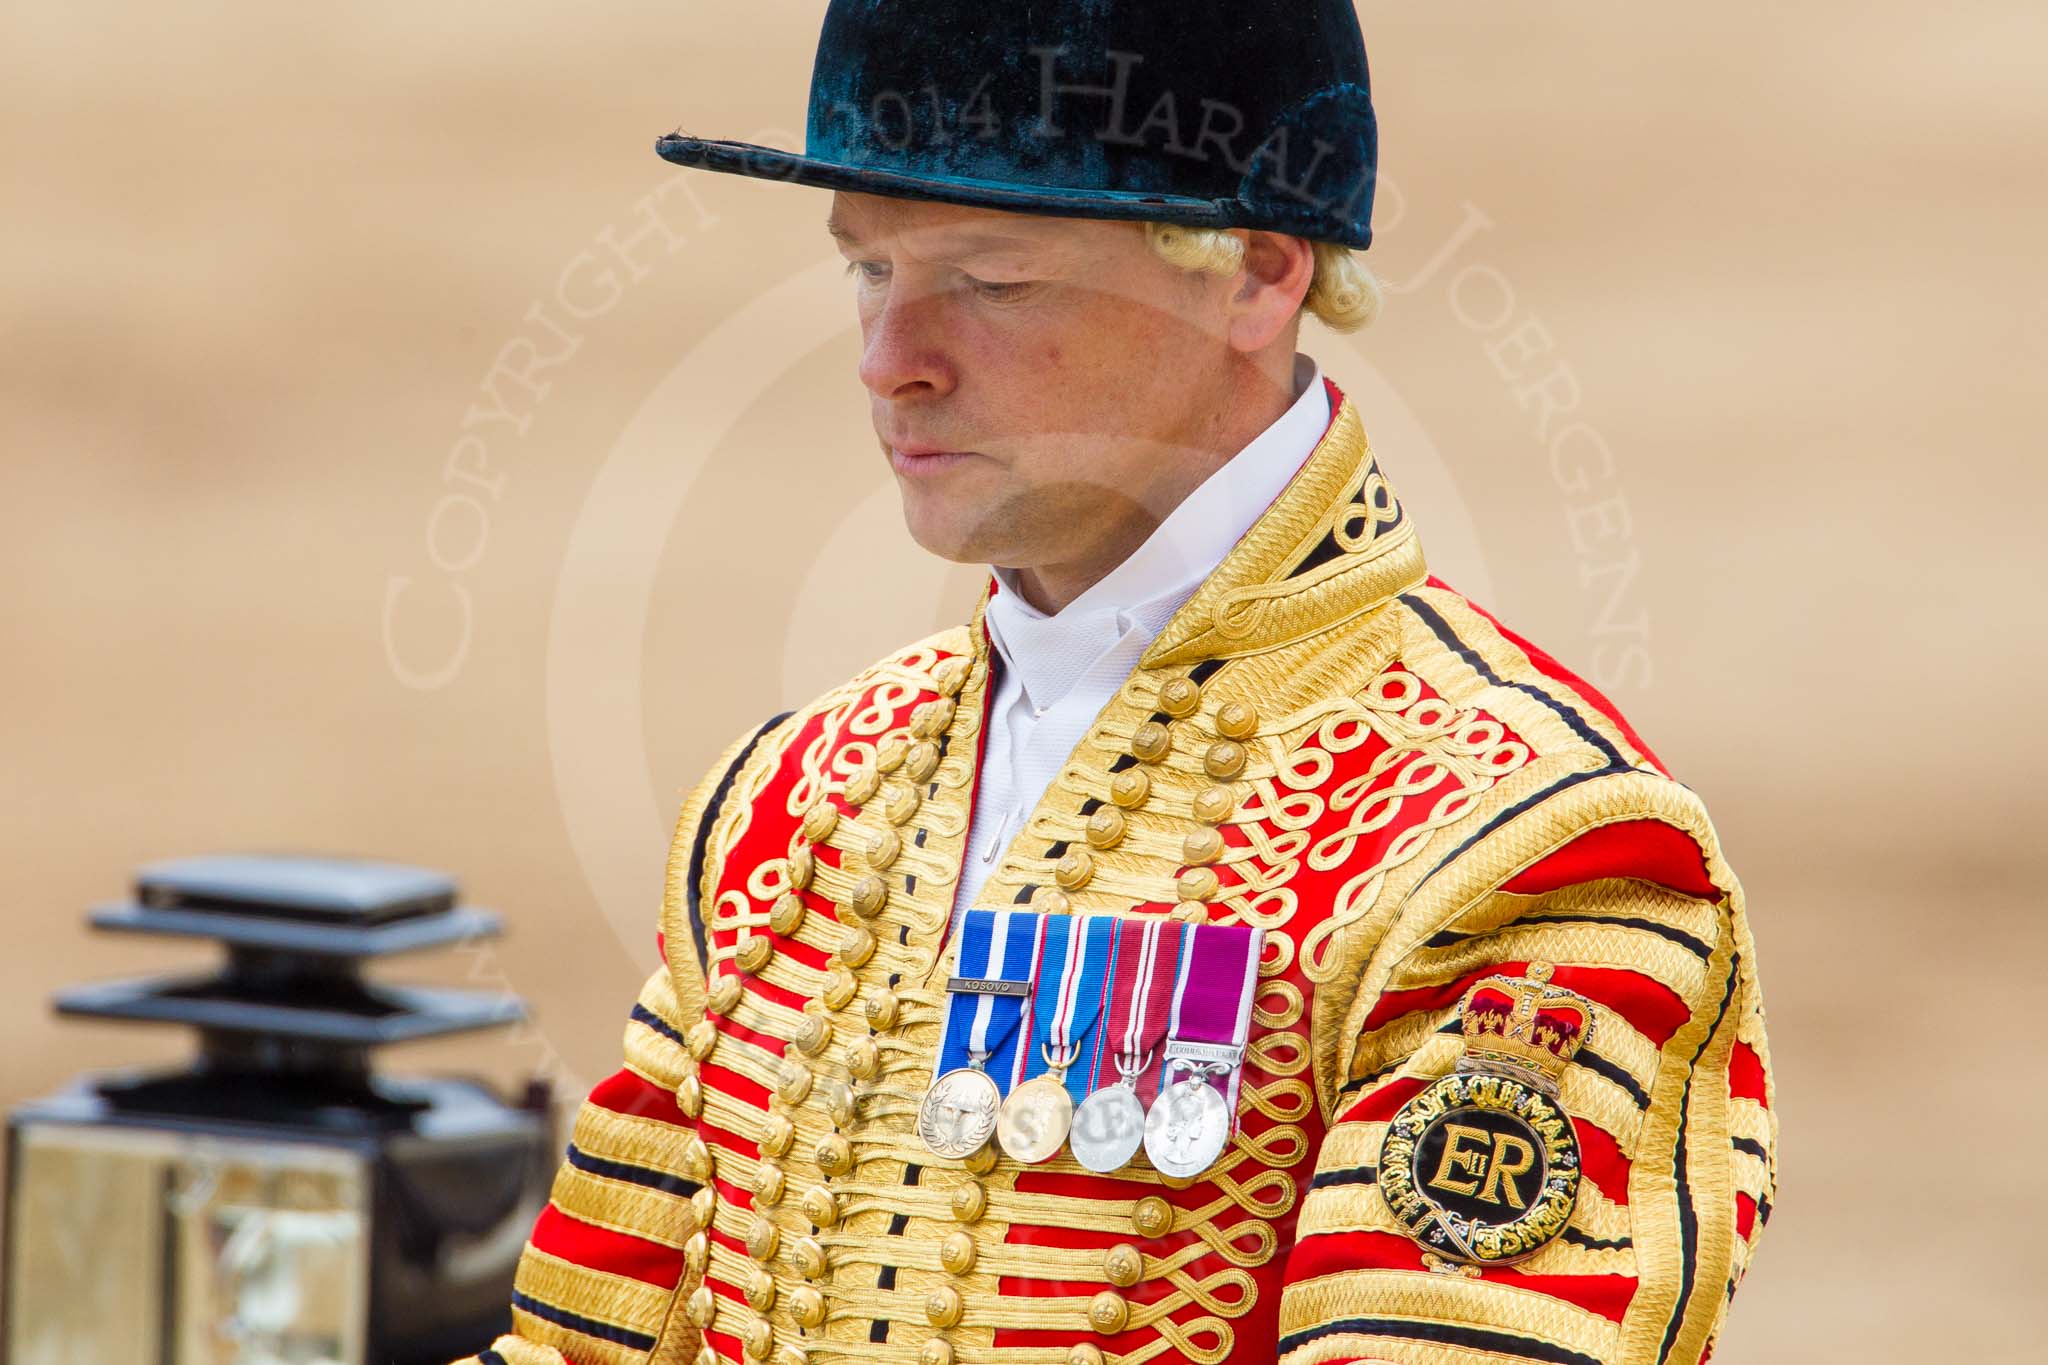 Trooping the Colour 2014.
Horse Guards Parade, Westminster,
London SW1A,

United Kingdom,
on 14 June 2014 at 12:11, image #883